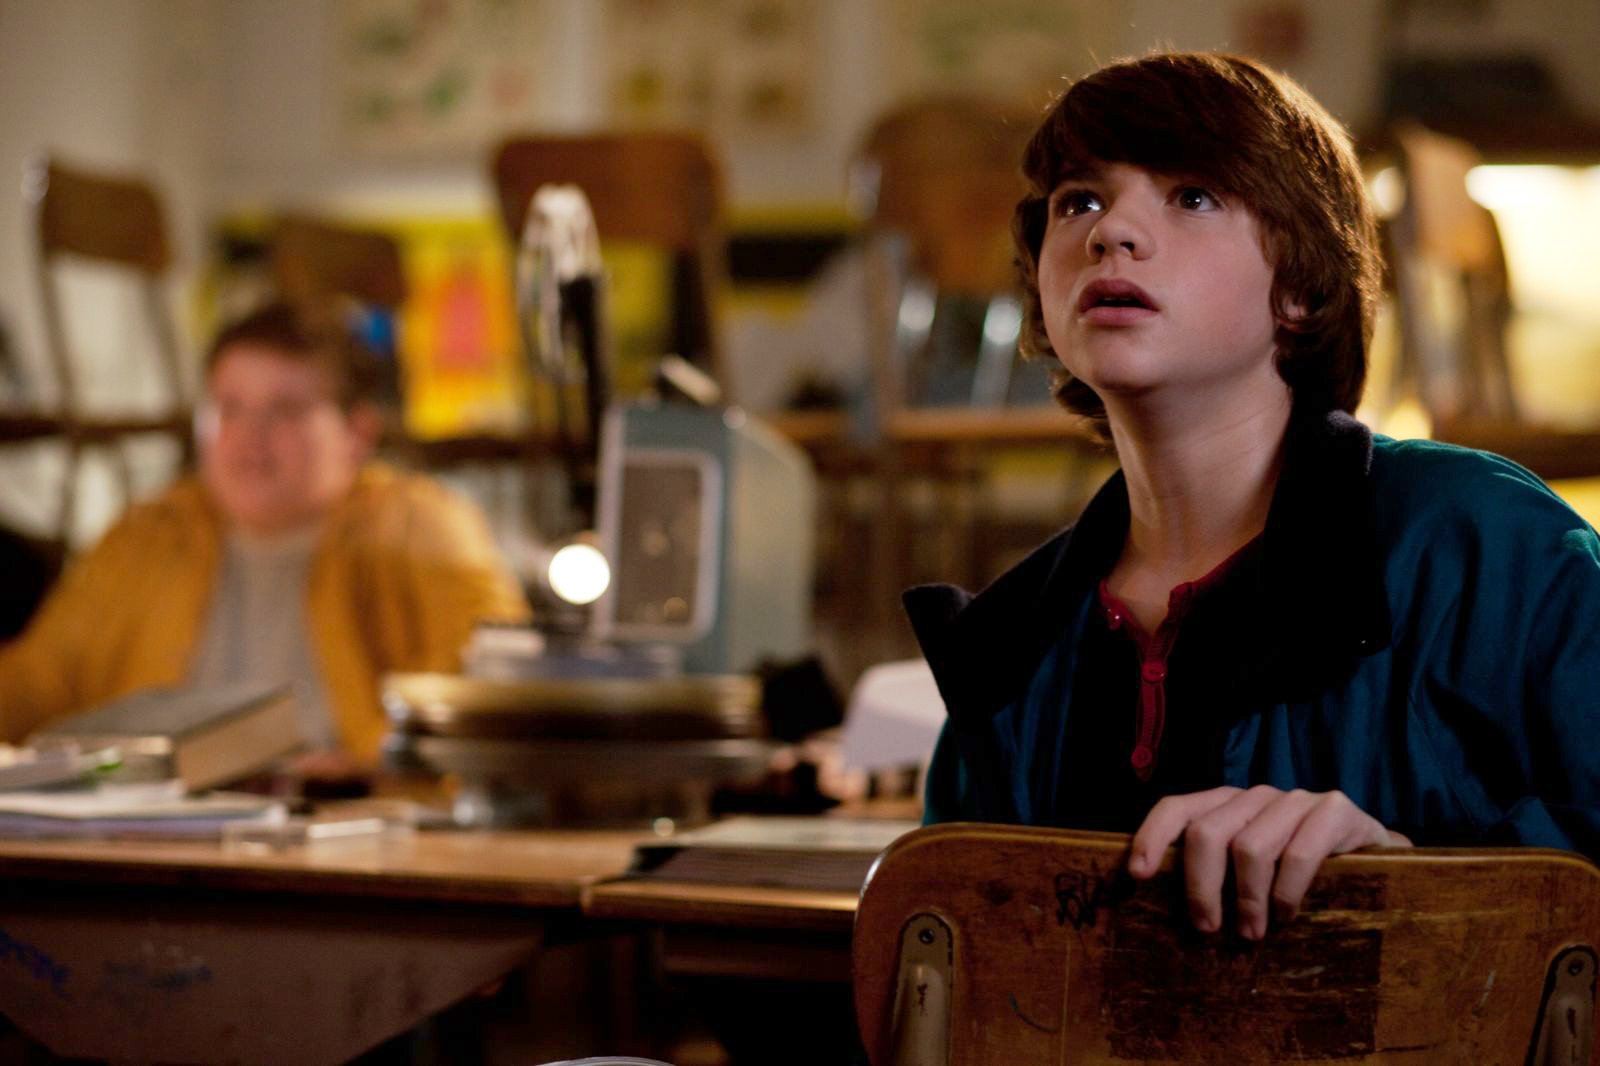 Riley Griffiths stars as Charles and Joel Courtney stars as Joe Lamb in Paramount Pictures' Super 8 (2011). Photo credit by Francois Duhamel.